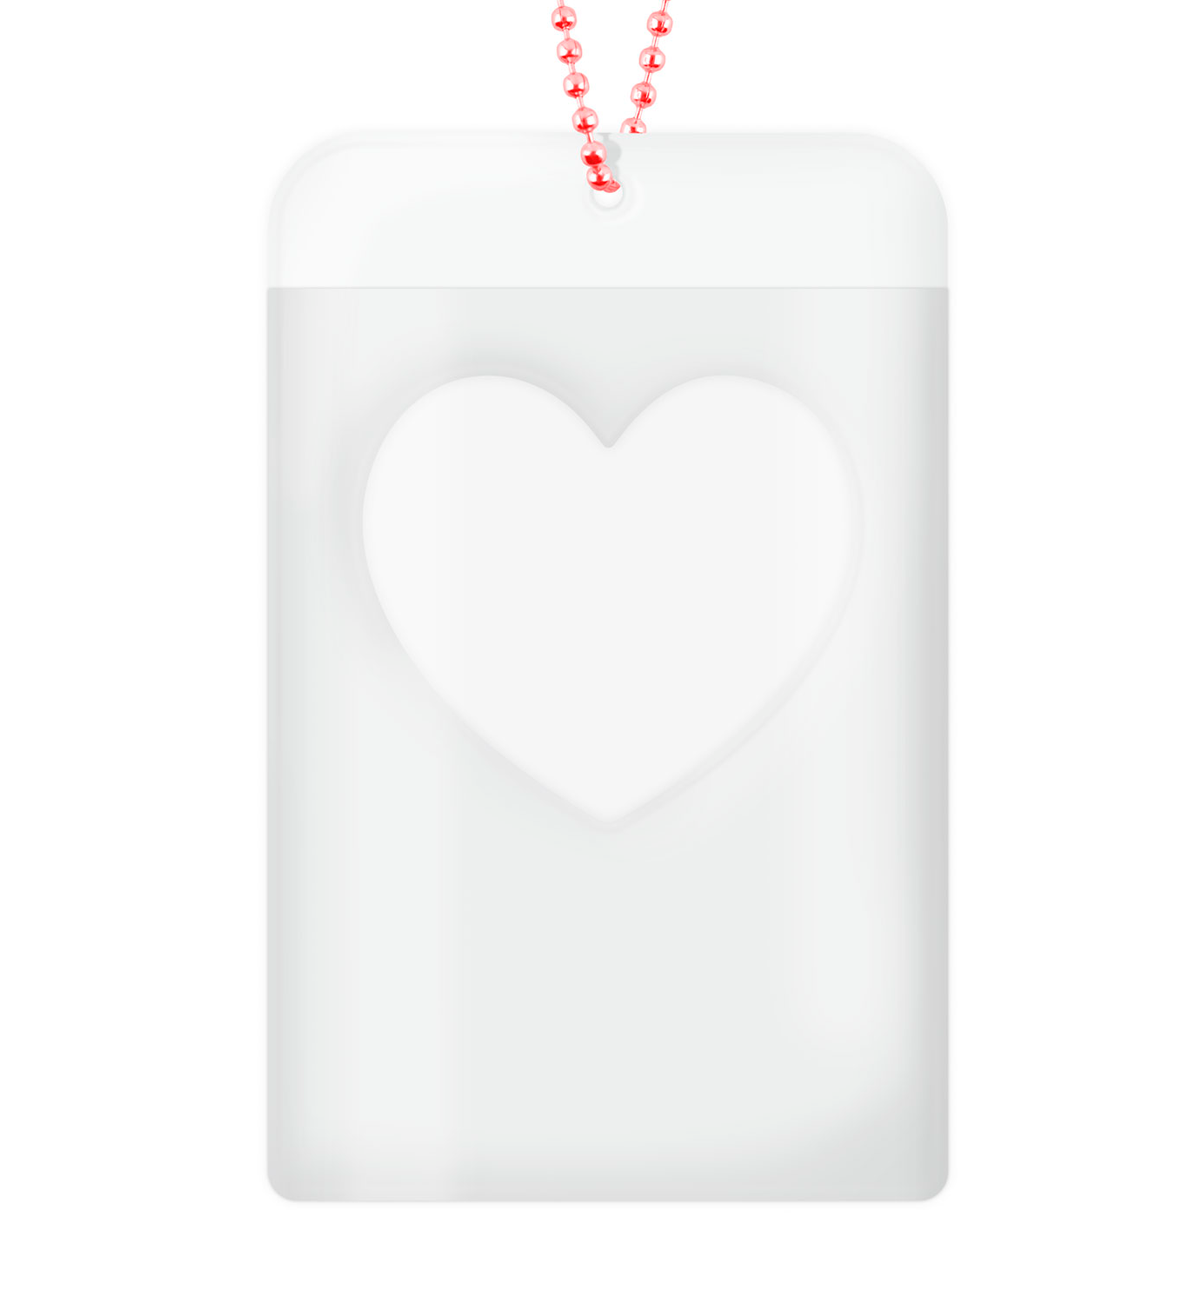 Cute & Cool Heart Charm Photocard Holder [Red Cherry]